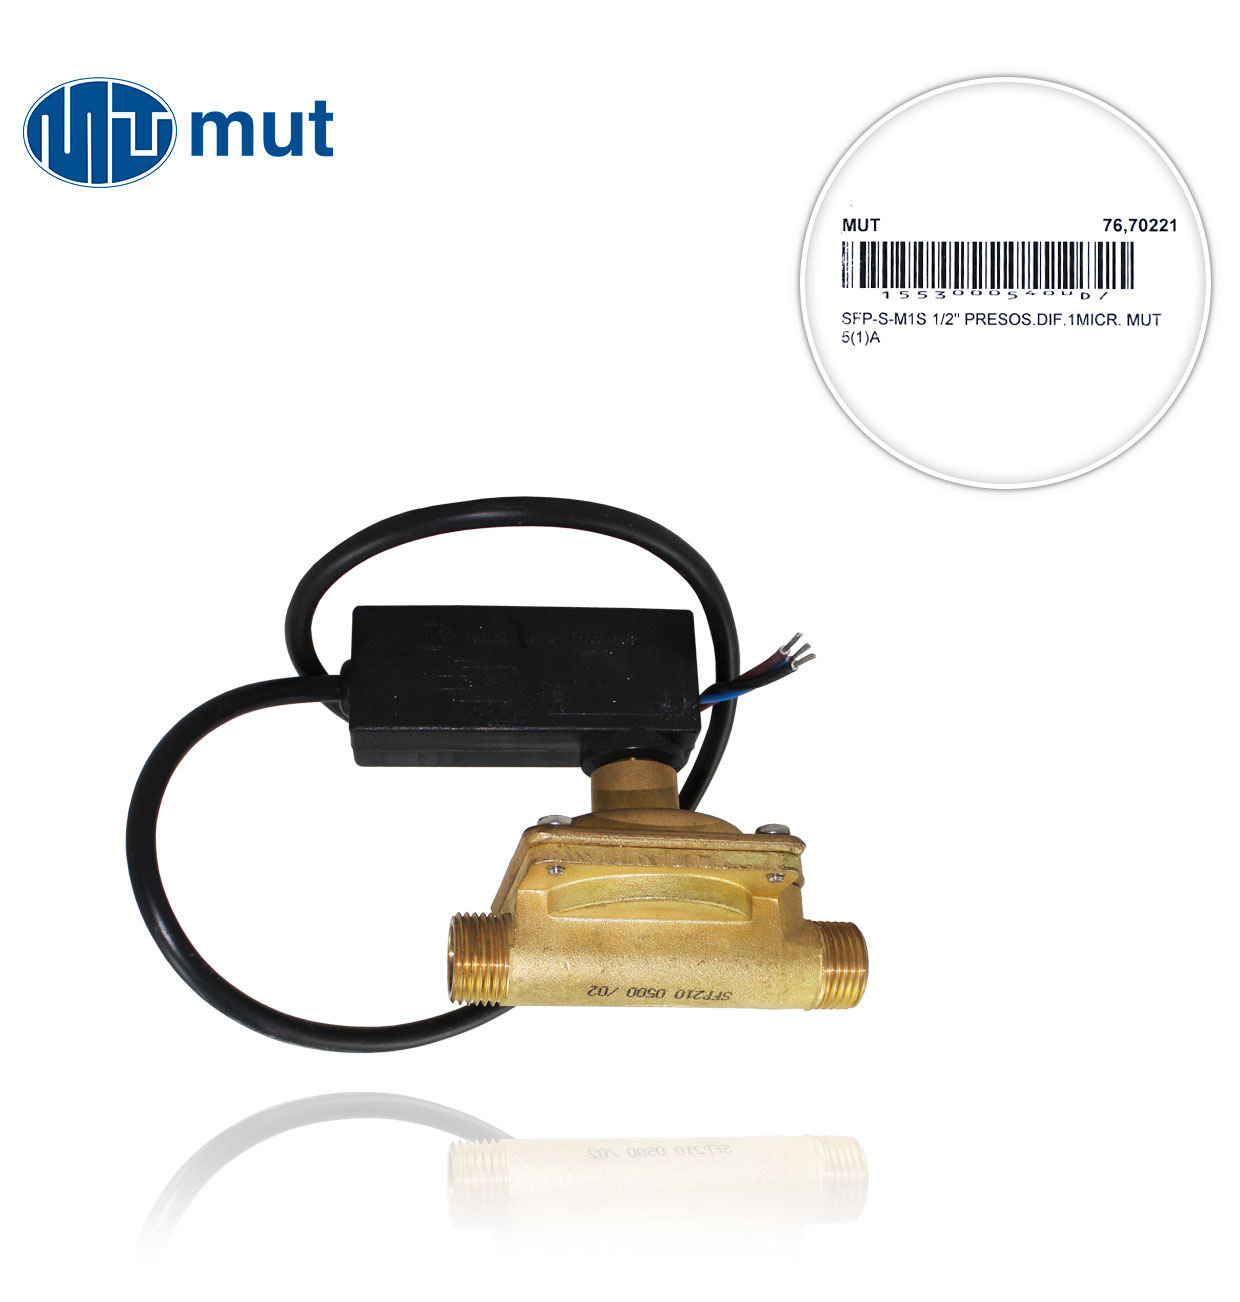 SFP-S-M1S 1/2" 1MICR. MUT 5(1)A DIFFERENTIAL PRESSURE SWITCH